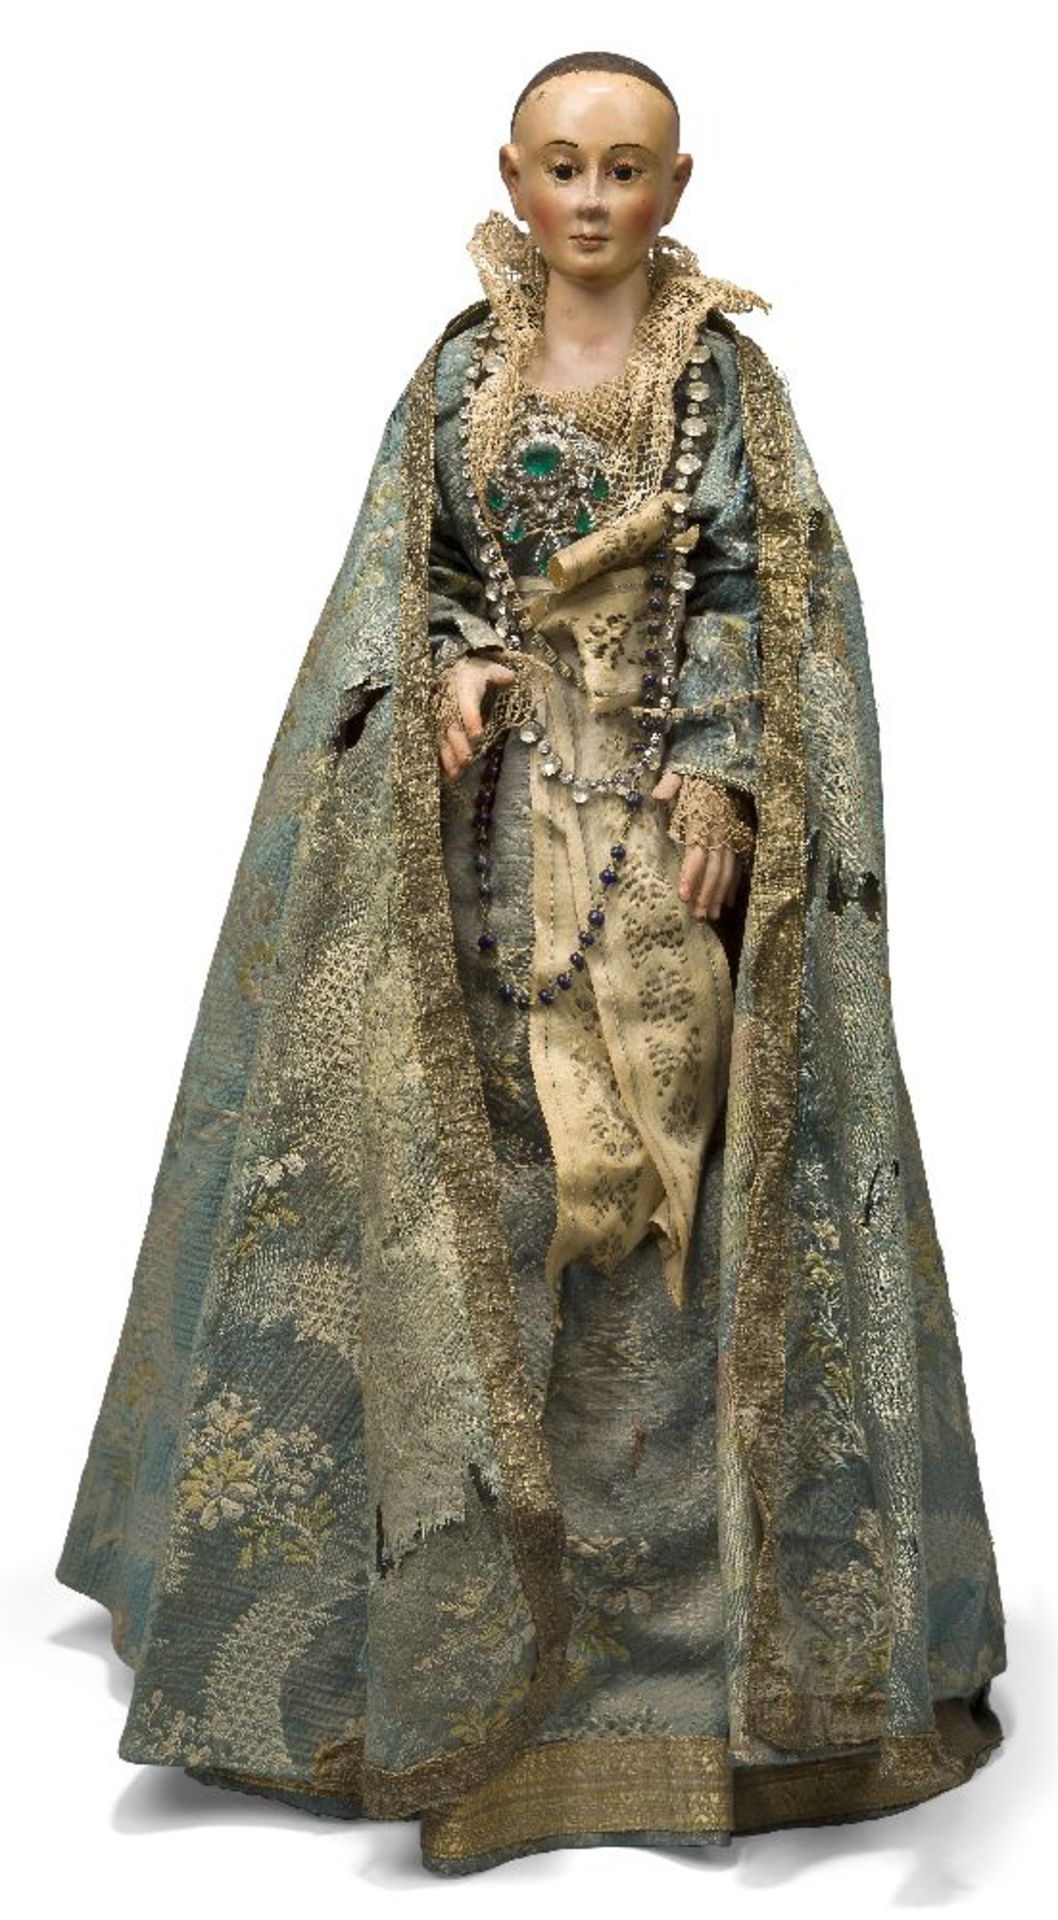 A Spanish polychromed carved wood processional figure, 18th/19th Century, the figure